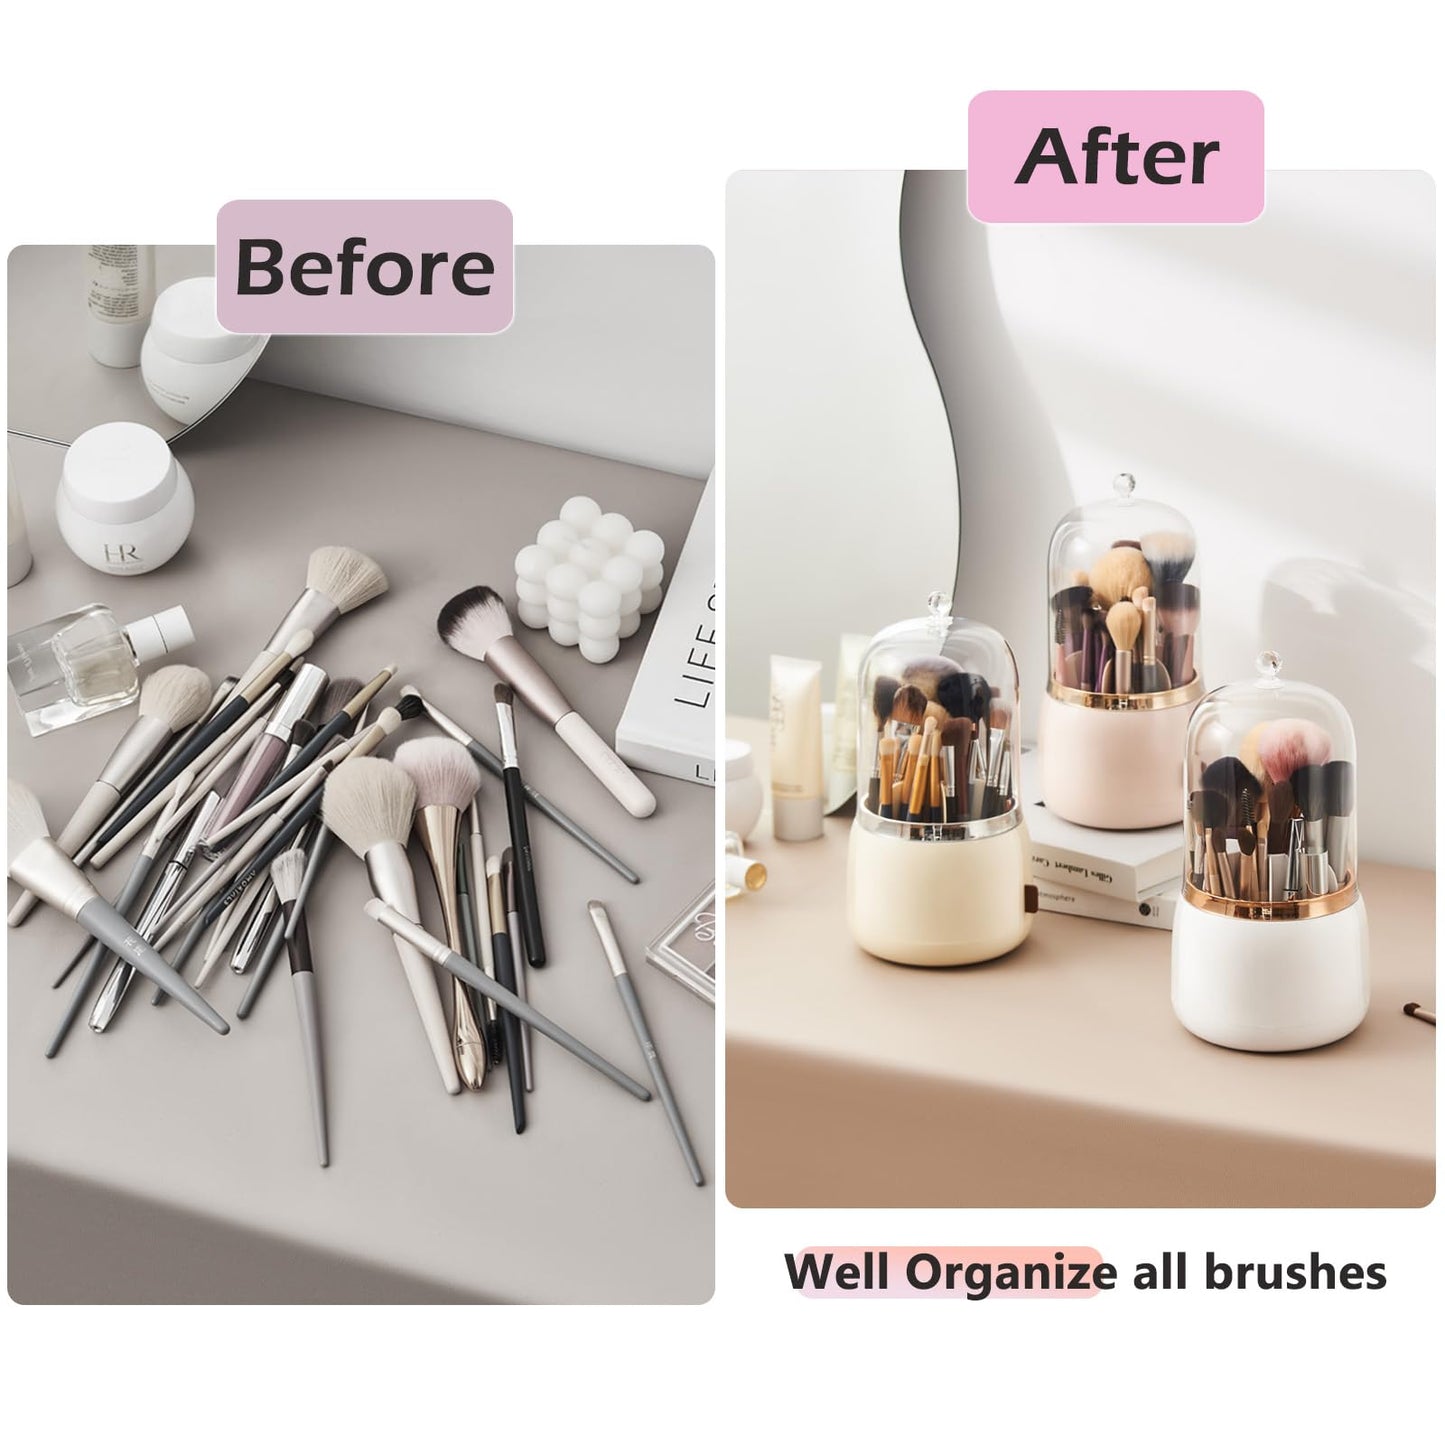 DEEIF Makeup Brush Holder Organizer with Lid 360 Rotating Dustproof Makeup Brushes Organizer for Vanity (Pearl White)